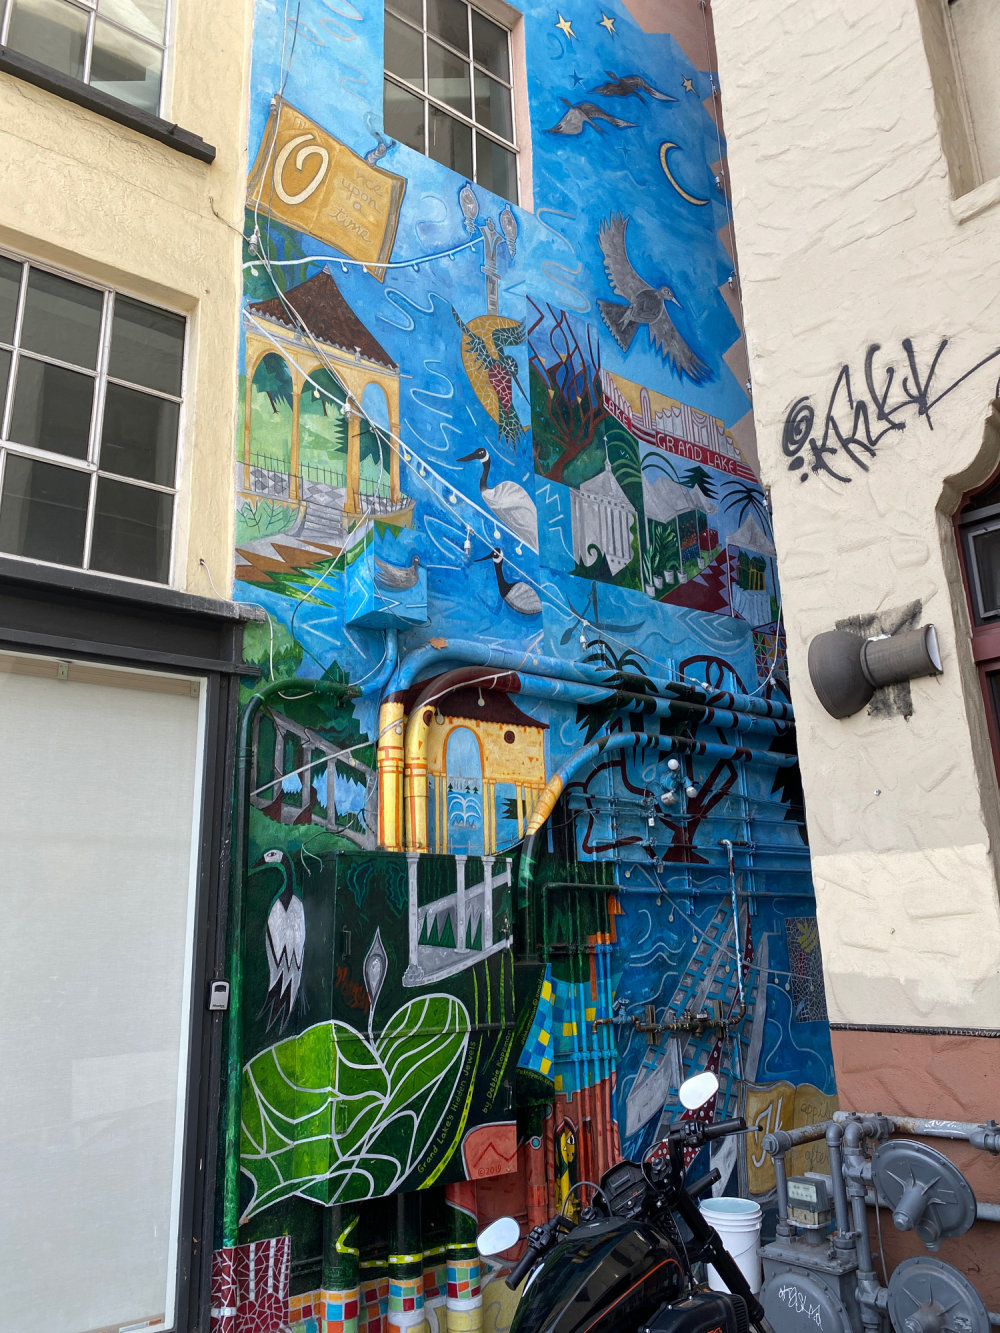 mural in Oakland by artist unknown.